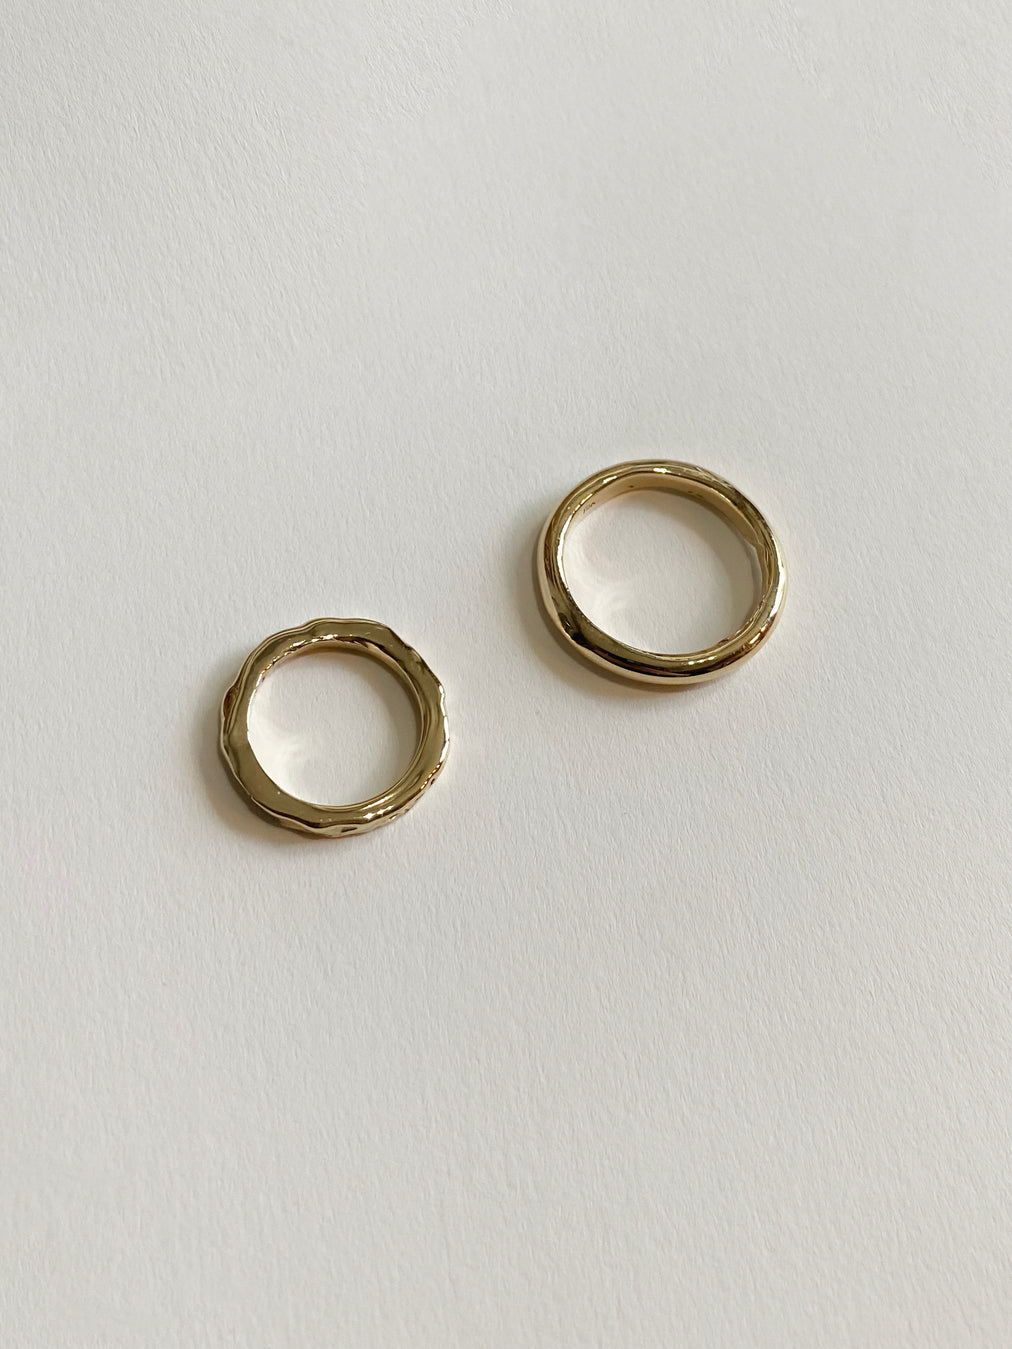 Make Your Own Wedding Ring(s): Lost Wax Carving Workshop - 2 Session Series